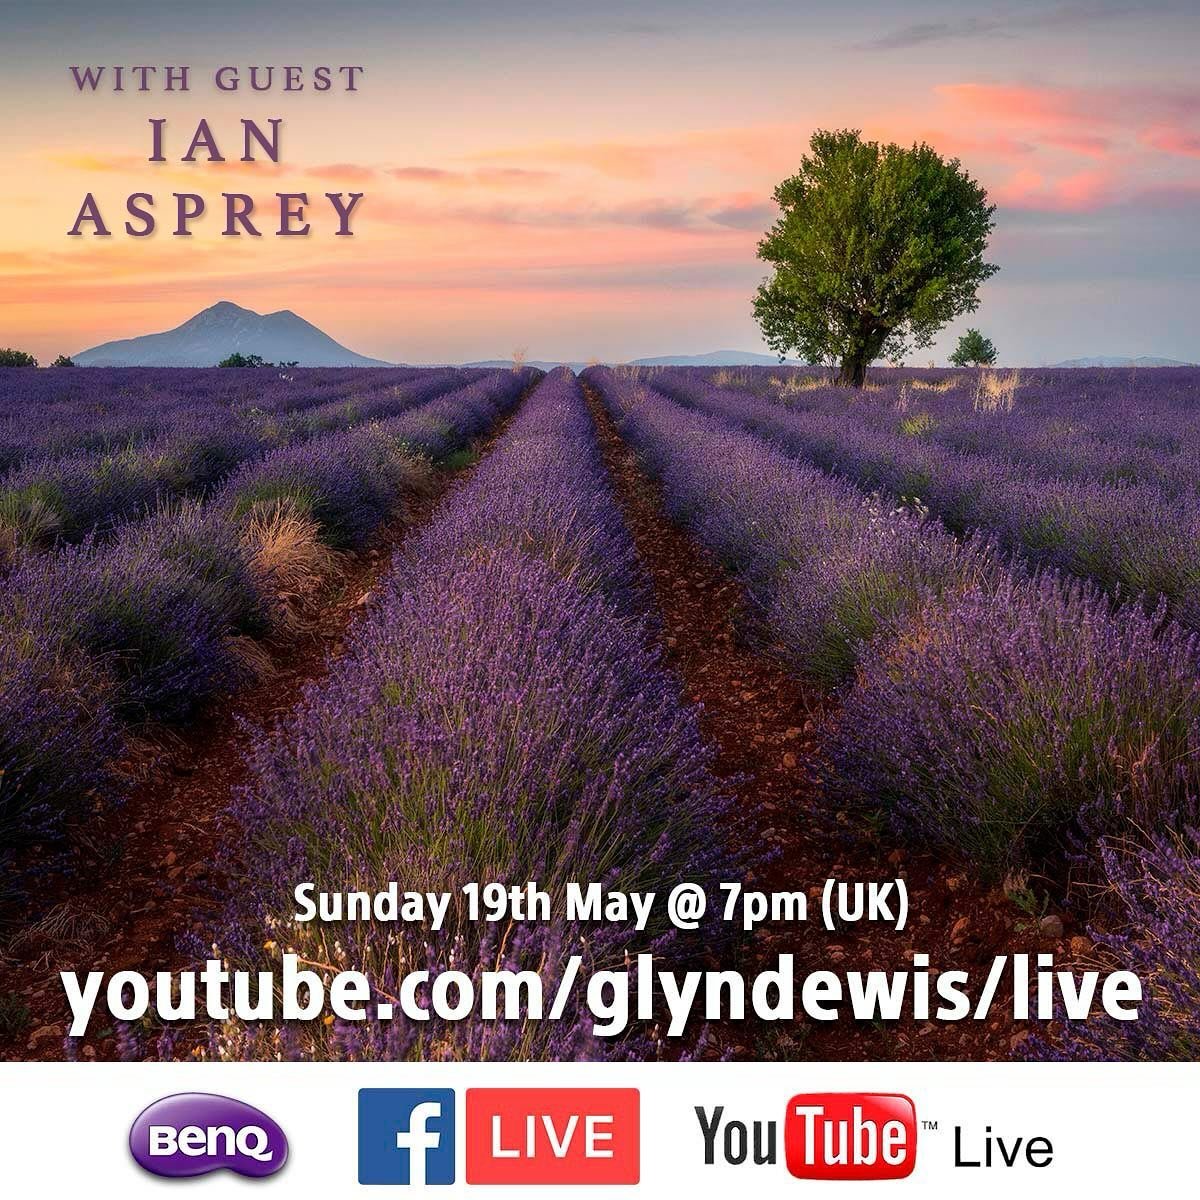 Looking forward to this later today &hellip;

Chatting LIVE with Landscape Photographer of the Year 2021, @landscapes_ianasprey at 7pm (UK) over on my YouTube Channel https://www.youtube.com/glyndewis/live *** LINK IN BIO ***

Hopefully catch you in 